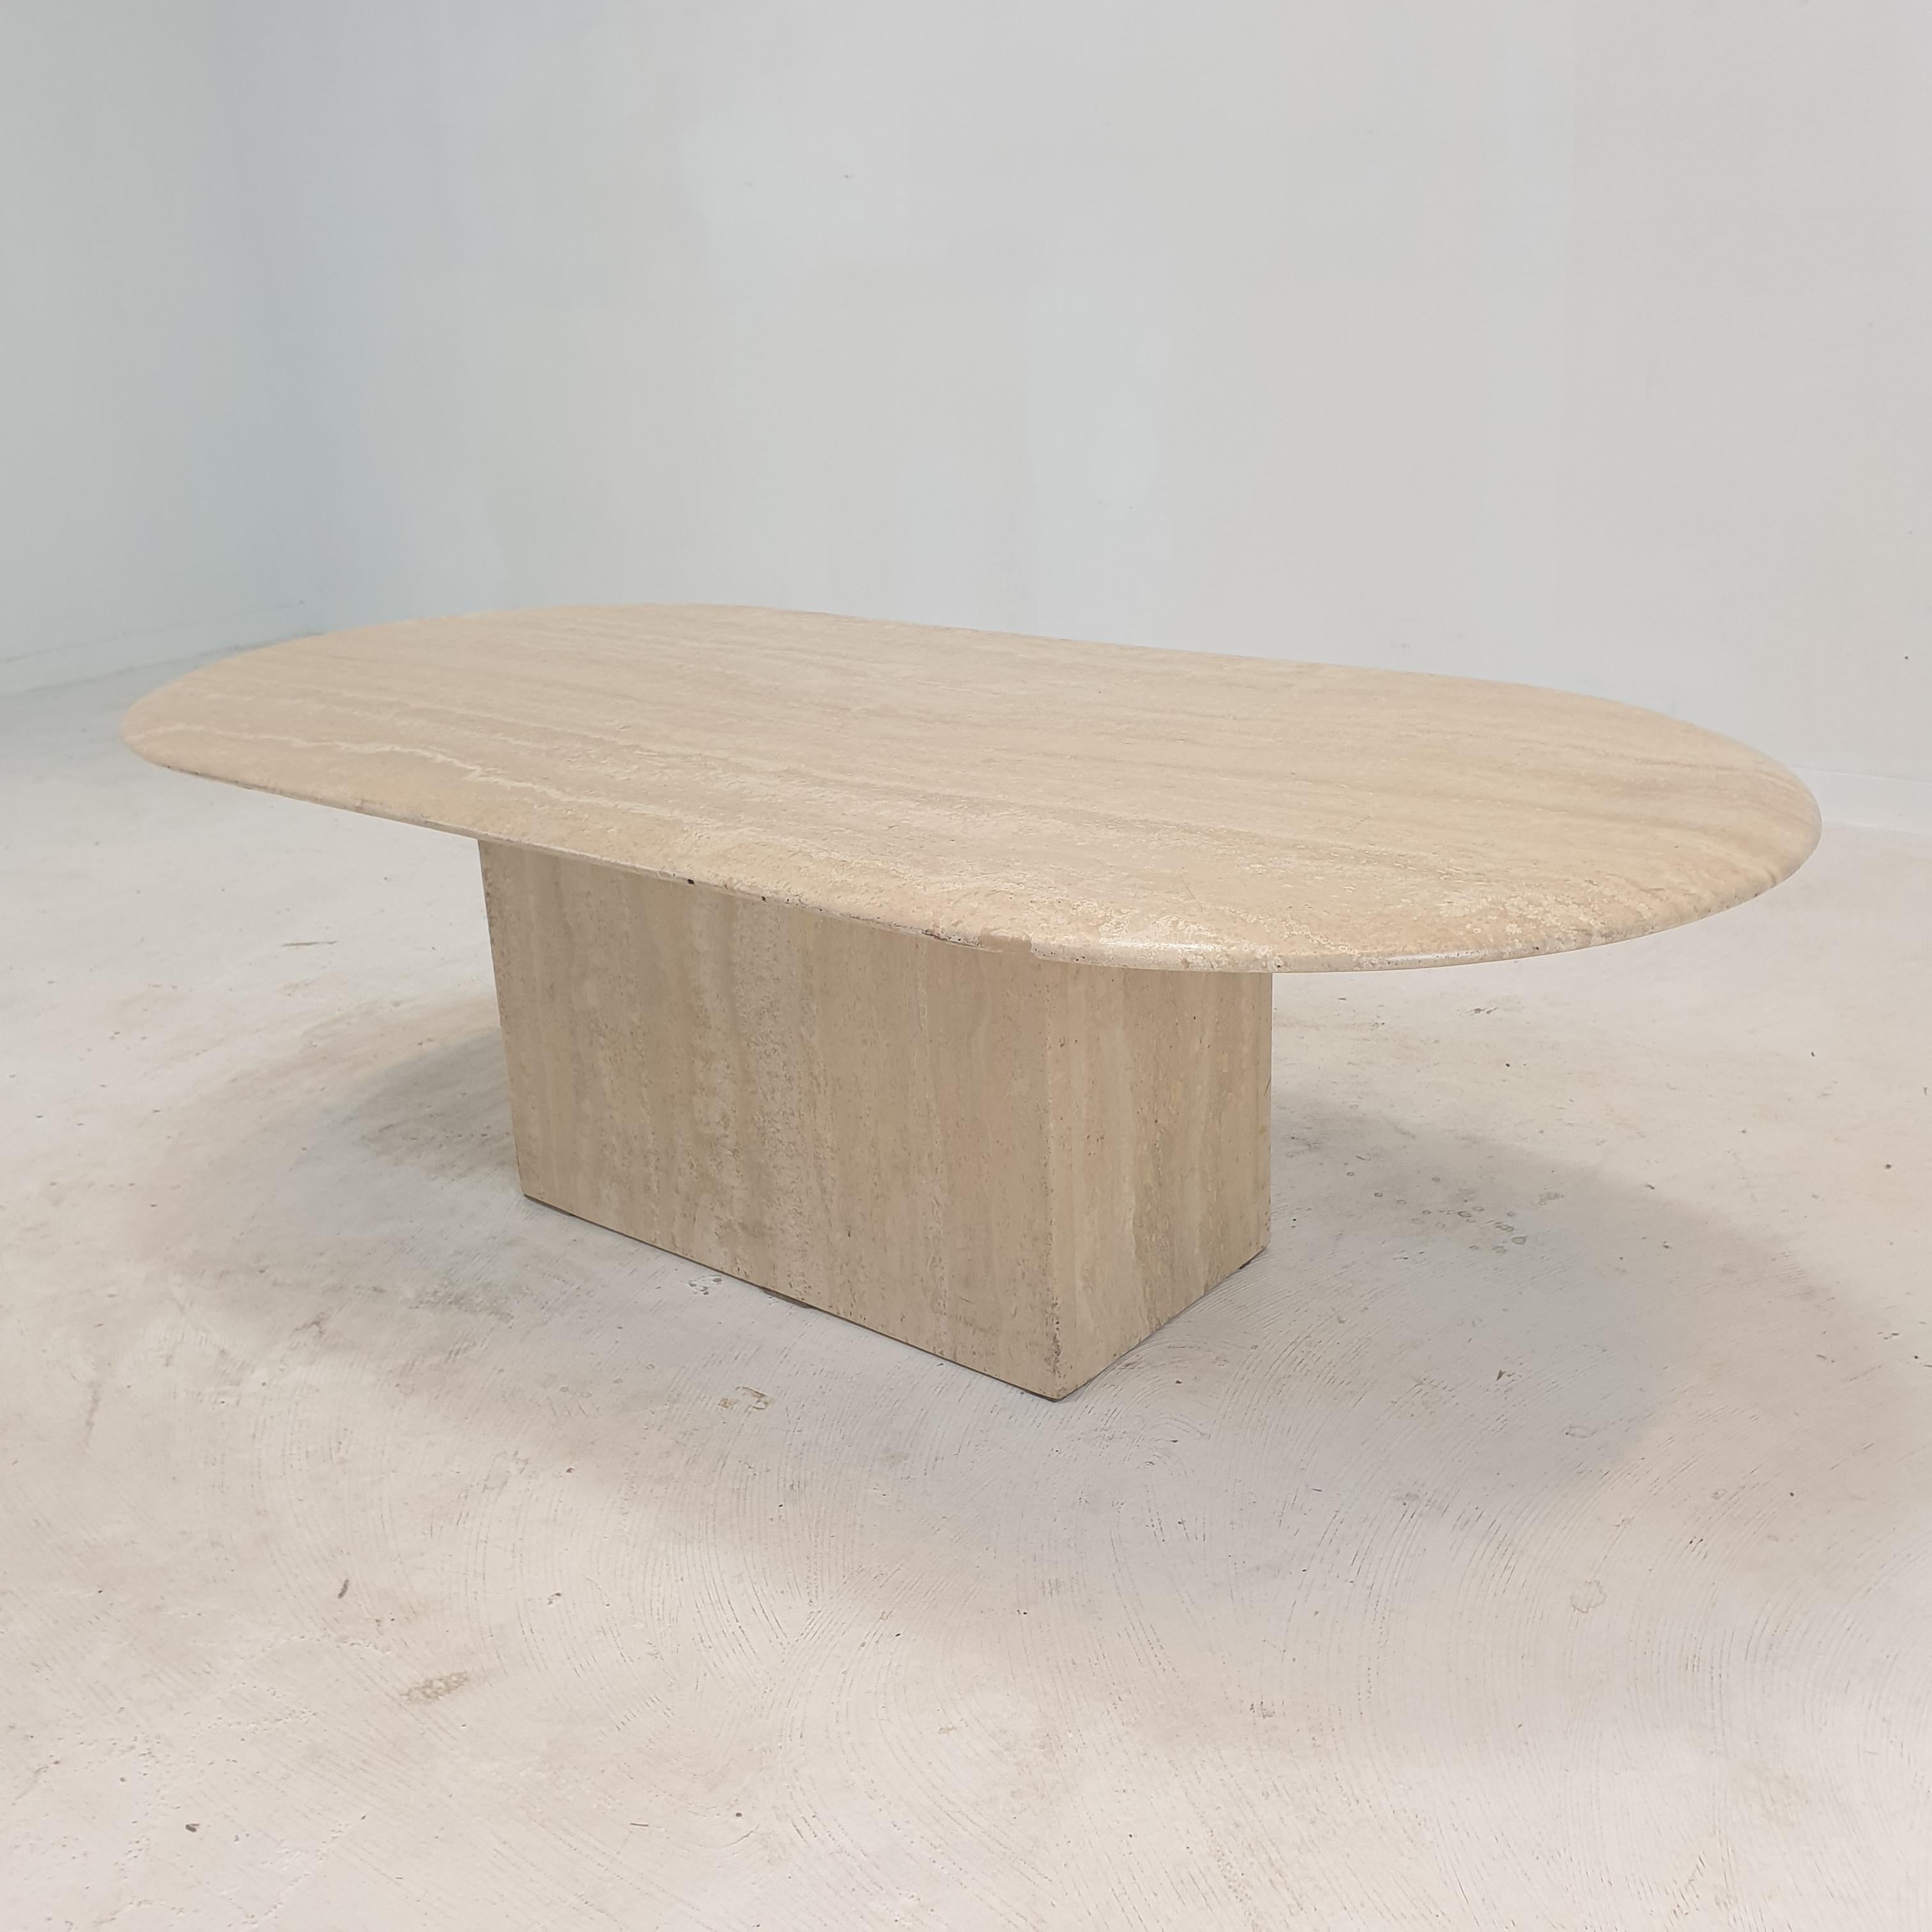 Italian Oval Coffee Table in Travertine, 1980s For Sale 4